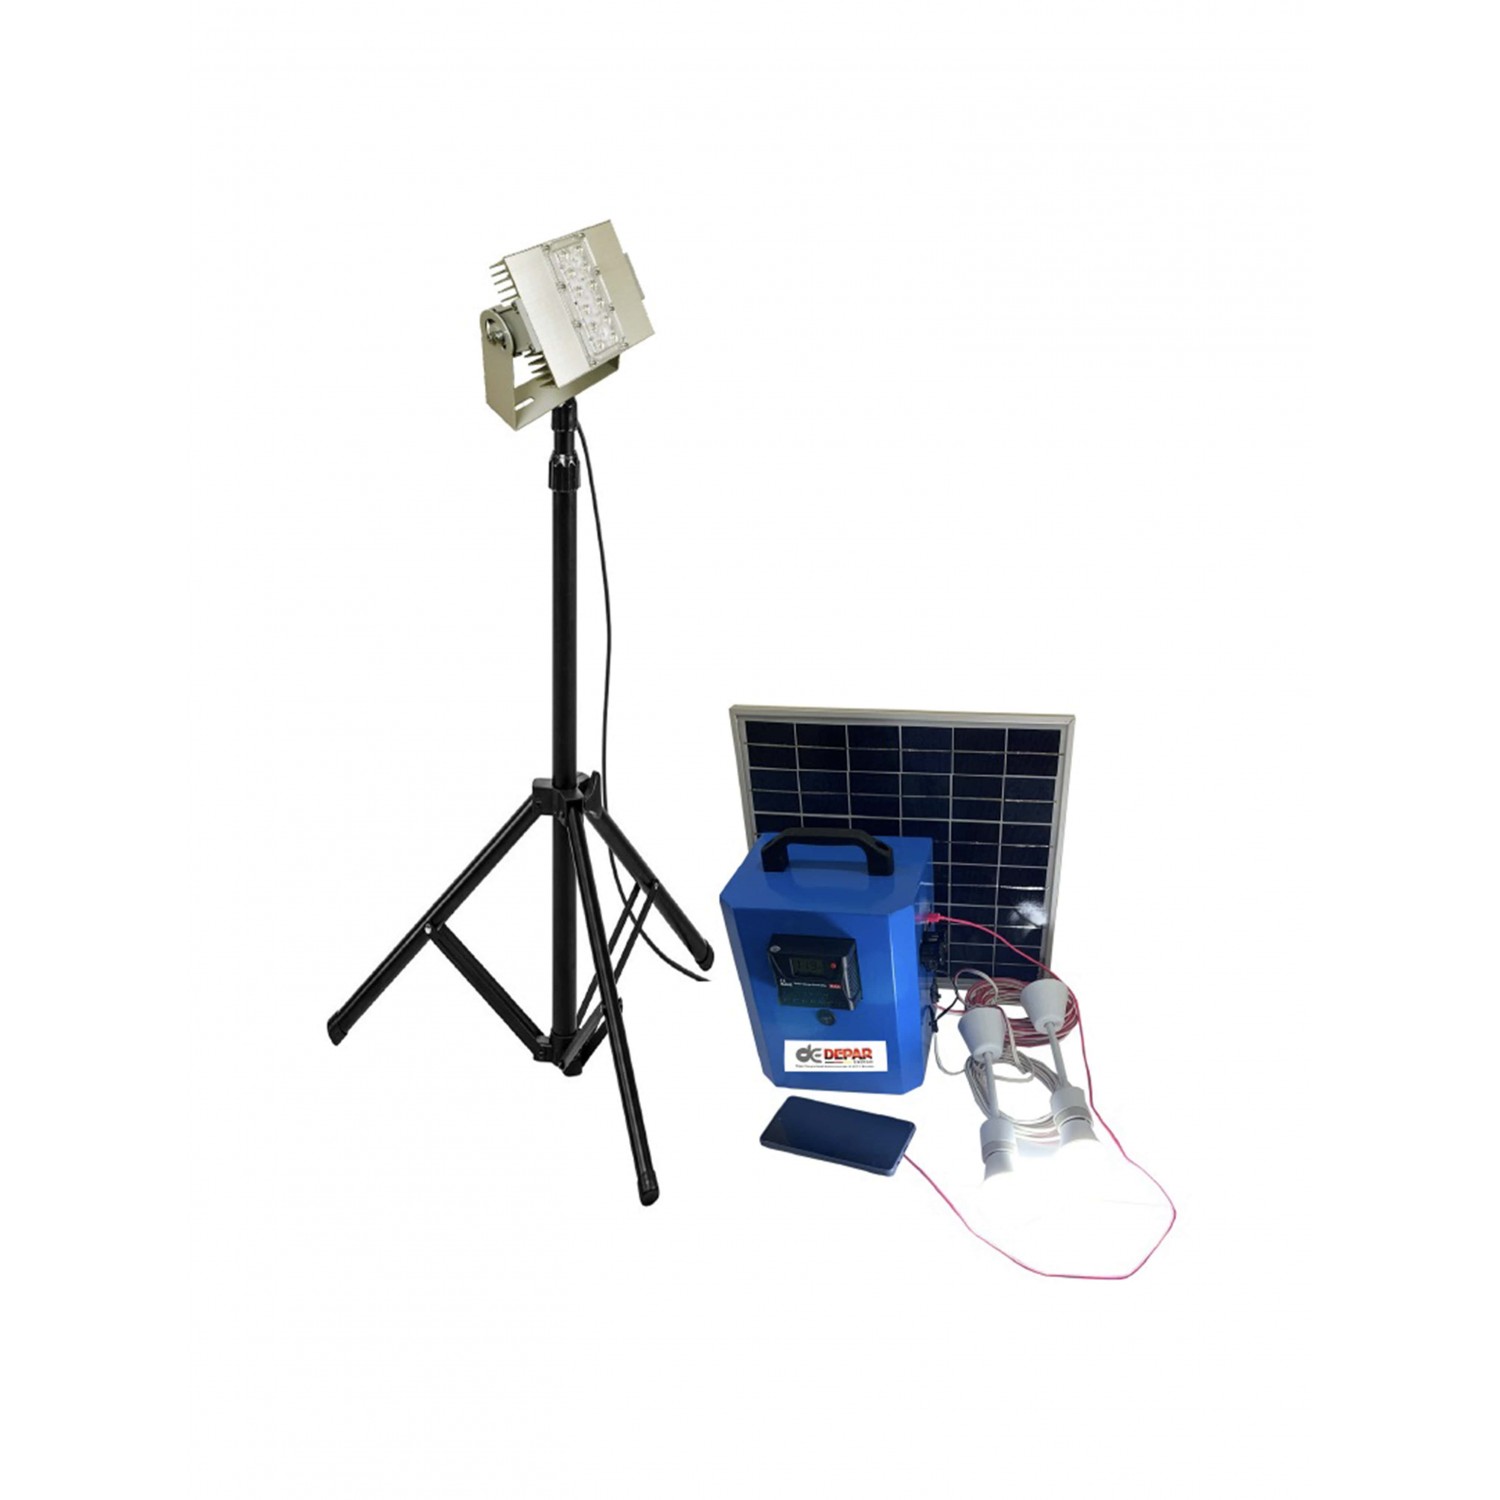 Solar Tripod Series Camping Picnic Outdoor Lighting Projector Mobile Phone Tablet USD Charge Tent Lighting LED Lamp ST5036